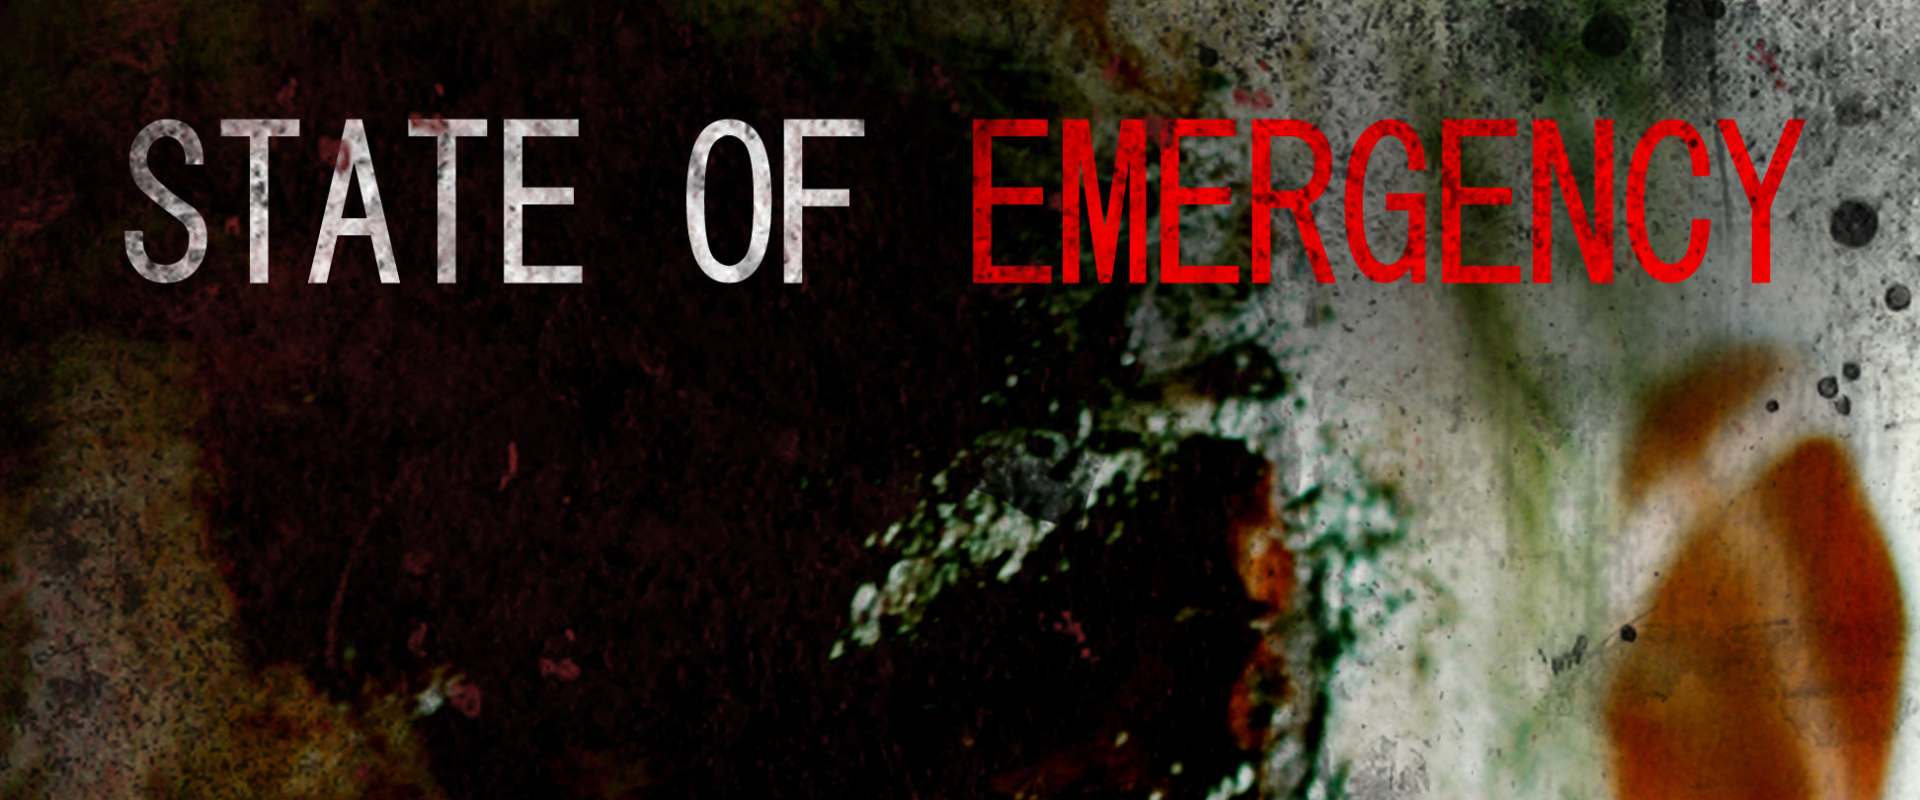 State of Emergency background 2